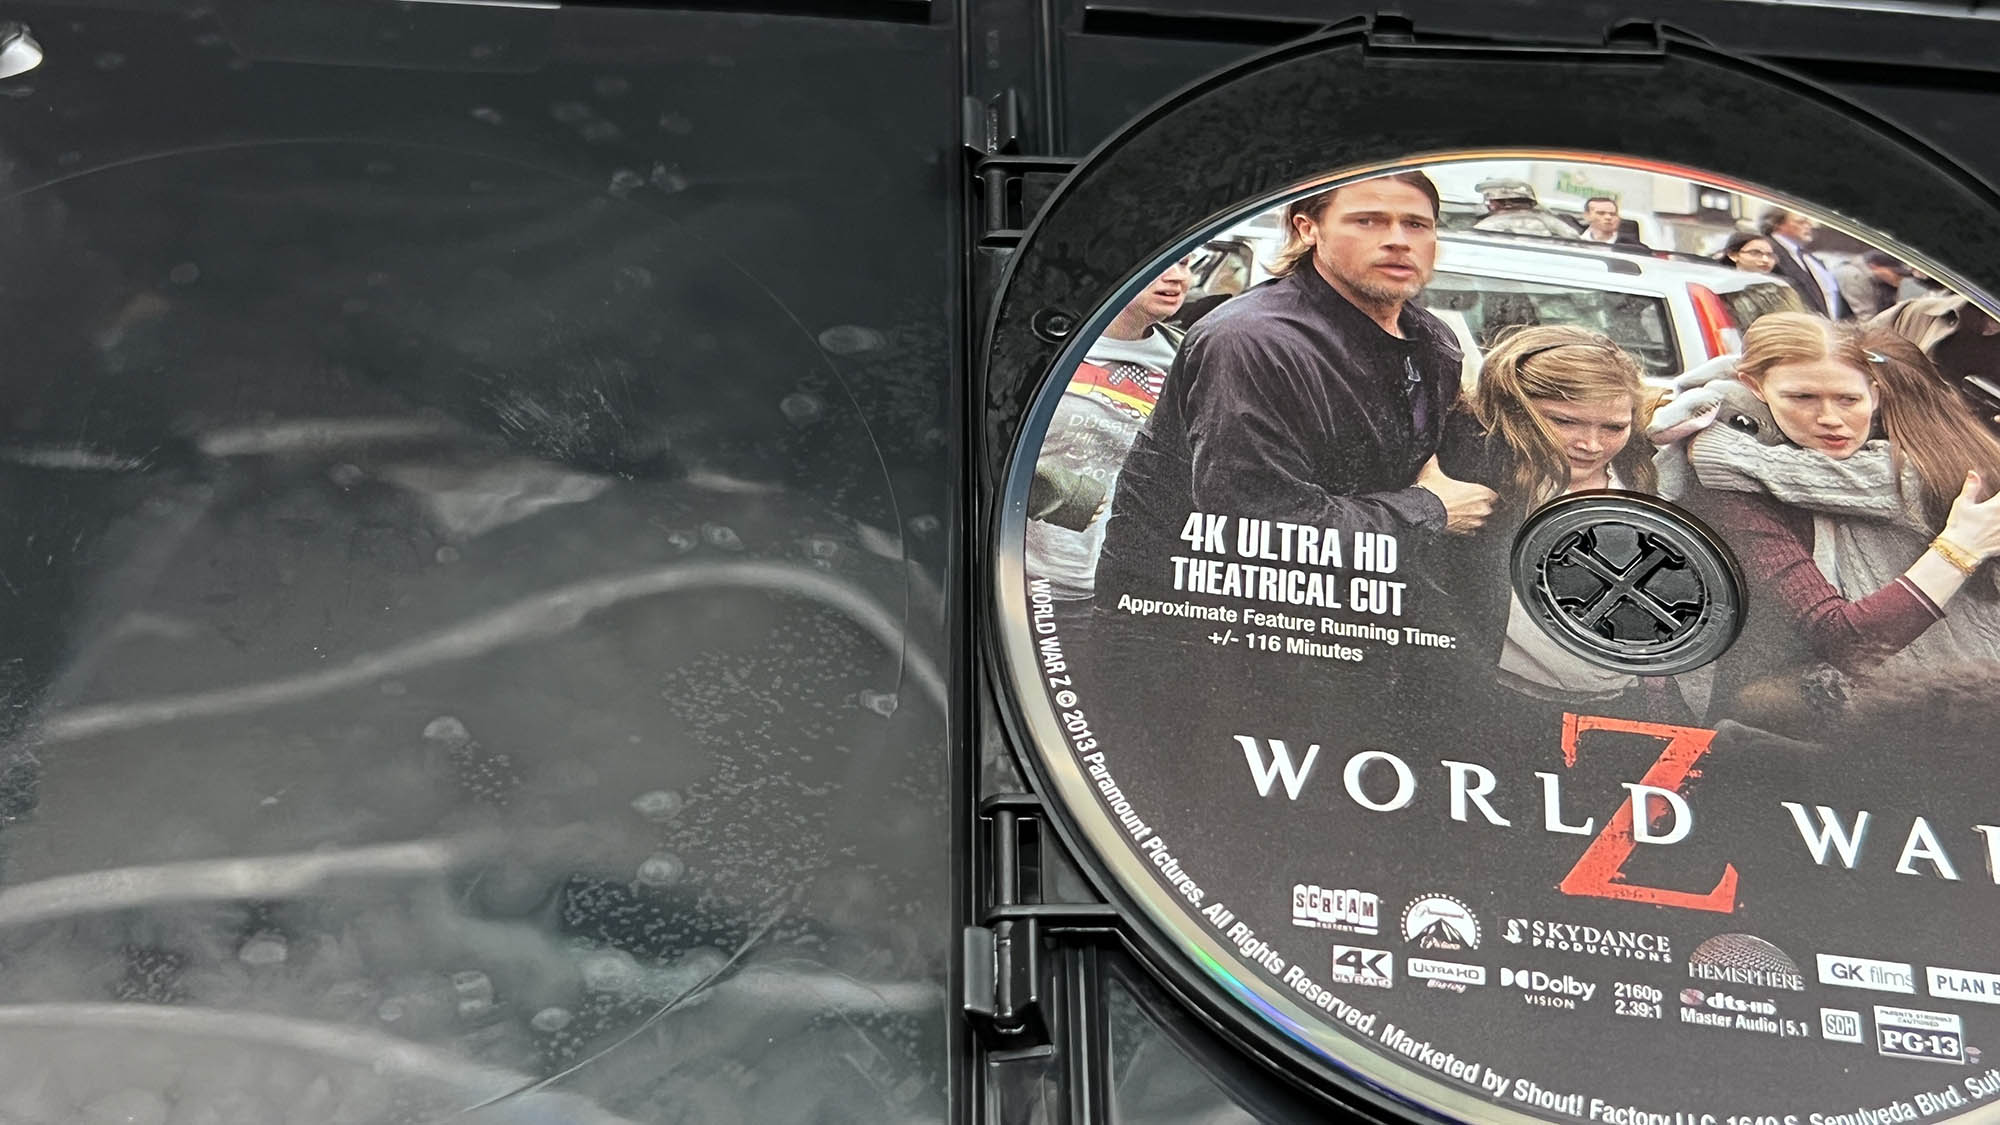 The World War Z 4k Blu-ray edition case and discs were full of spots and smudges.